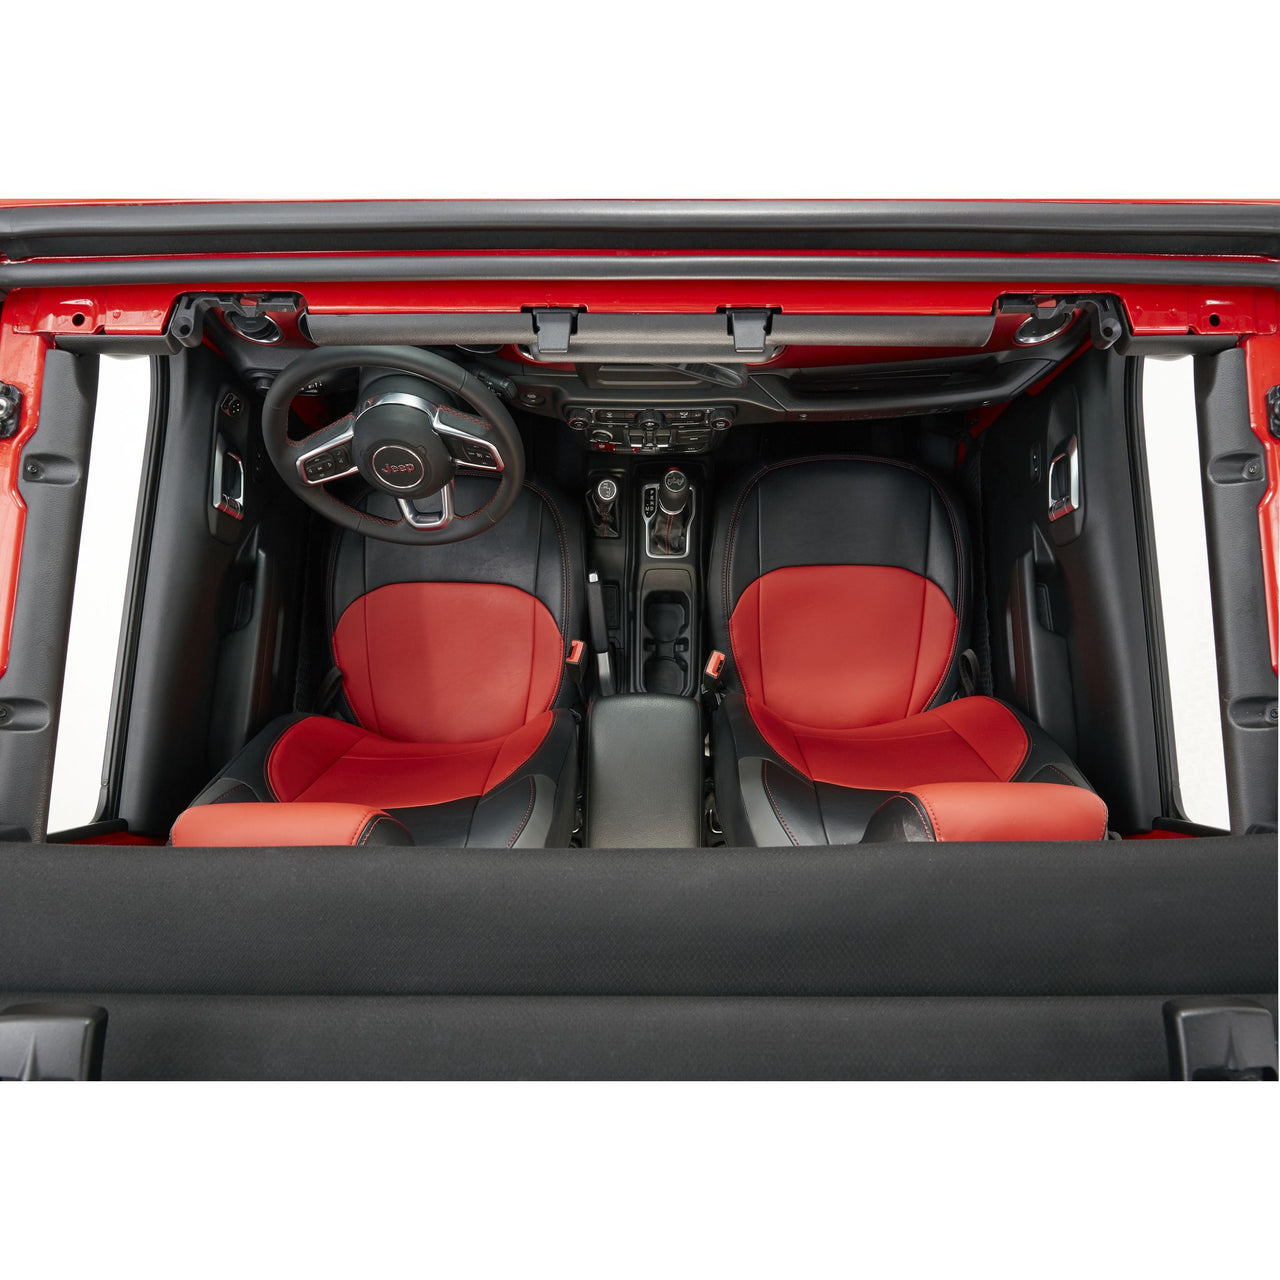 PRP 2018+ Jeep Wrangler JL/2 door/ Non-Rubicon Front Seat Covers (Pair) - Black/Red